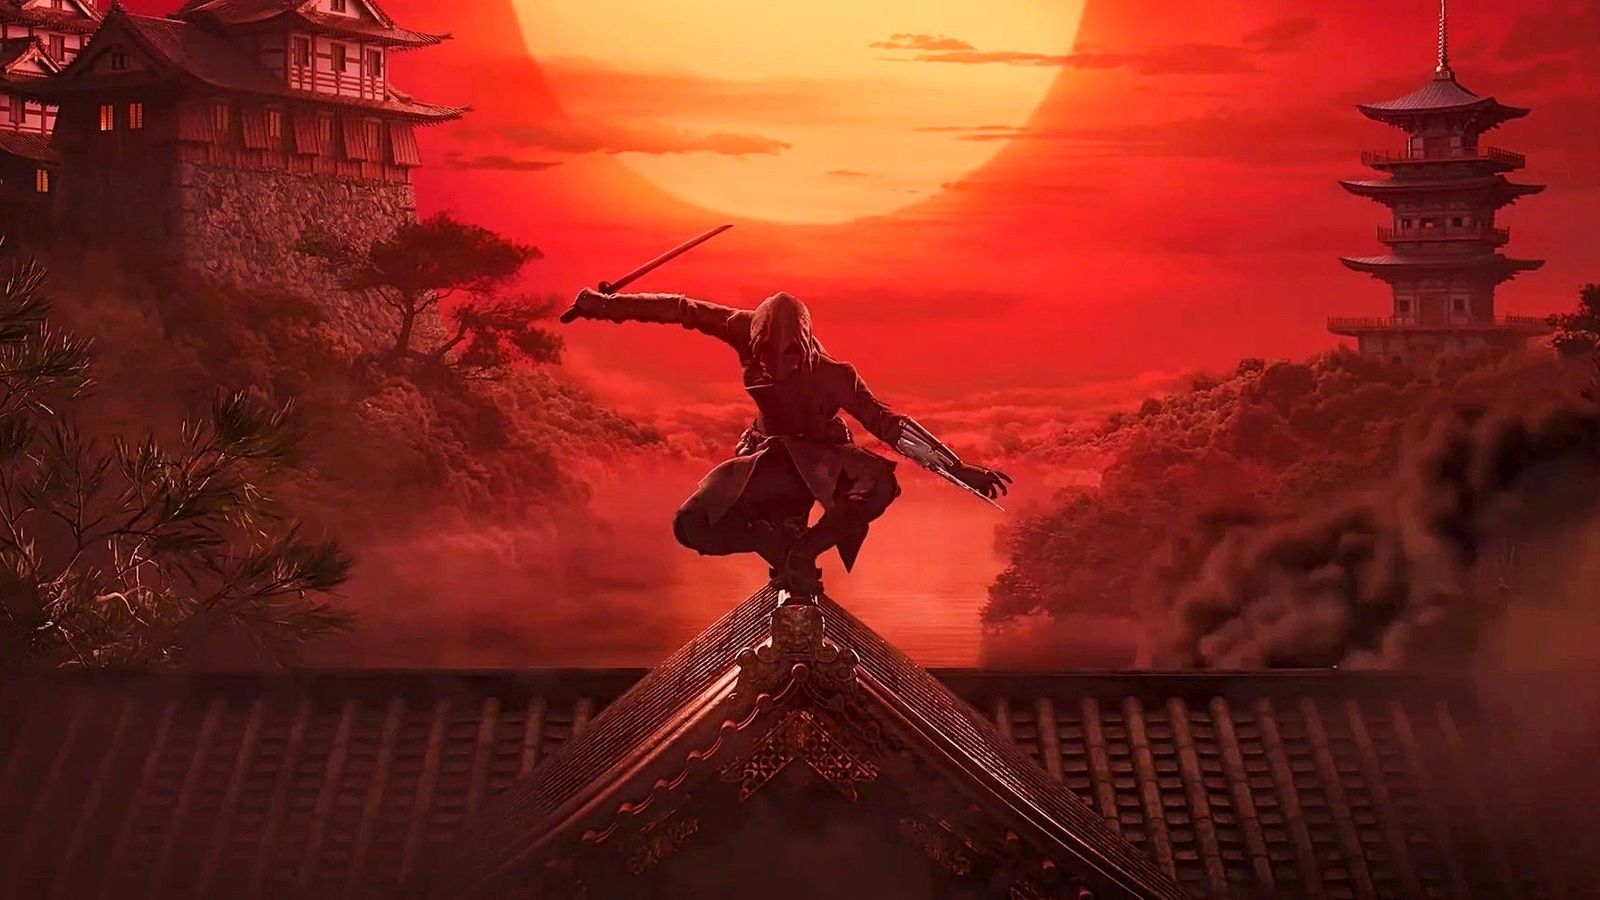 Key art for Assassin's Creed Shadows showing a feminine Assassin posing on the roof of a Japanese-styled building with the setting sun in the background.